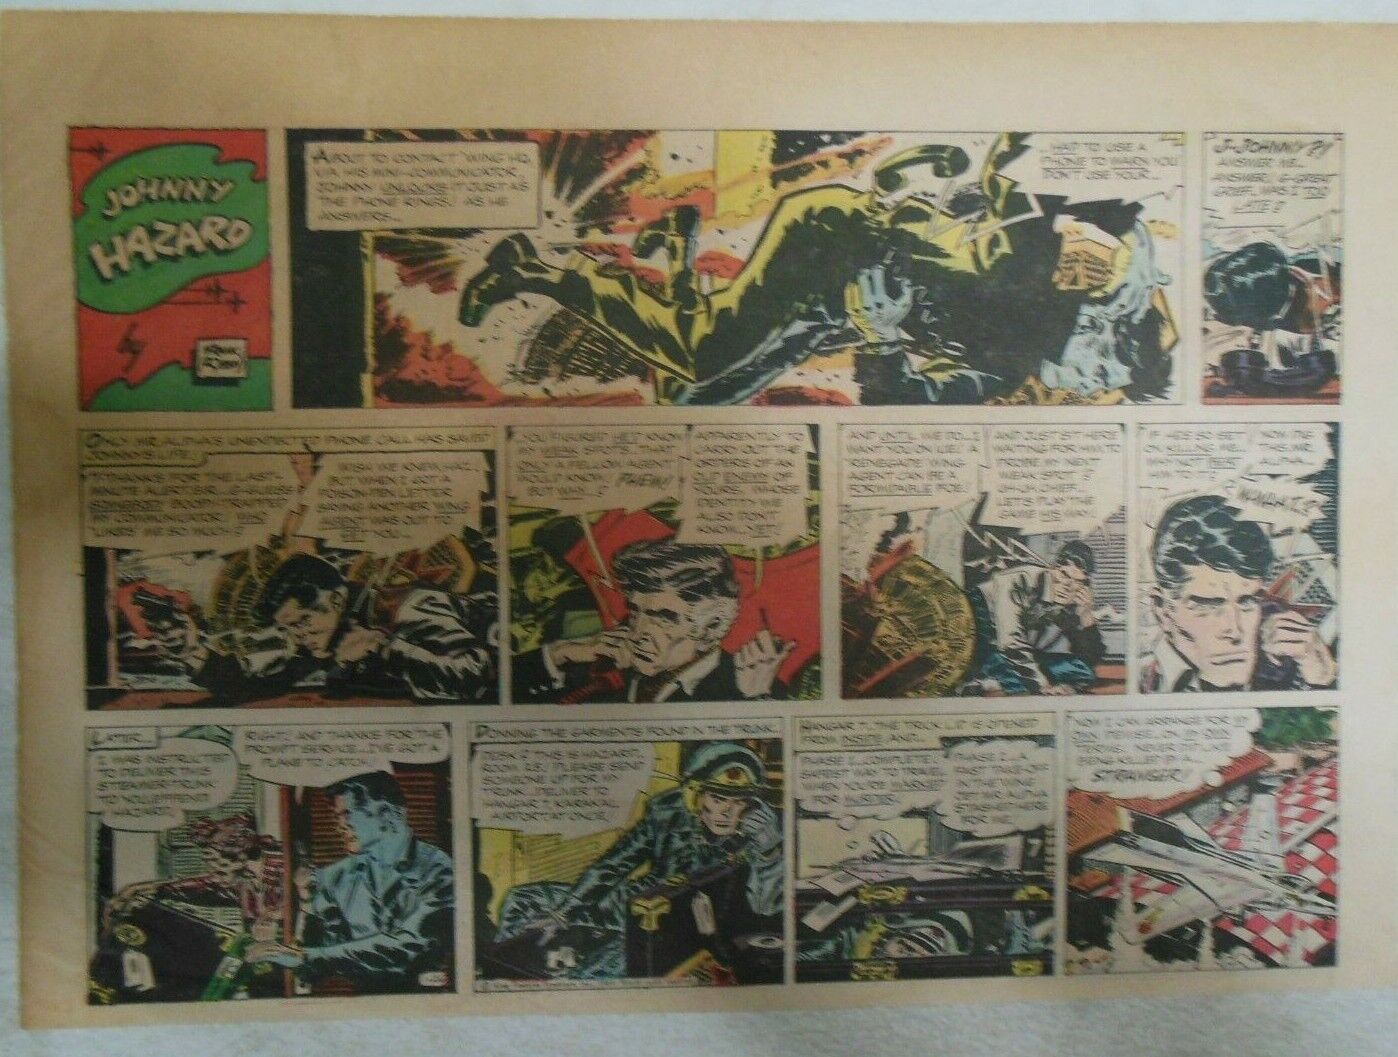 (52) Johnny Hazard Sunday Pages by Frank Robbins from 1969 All 11 x 15 inches ! 15% ZNIŻKI